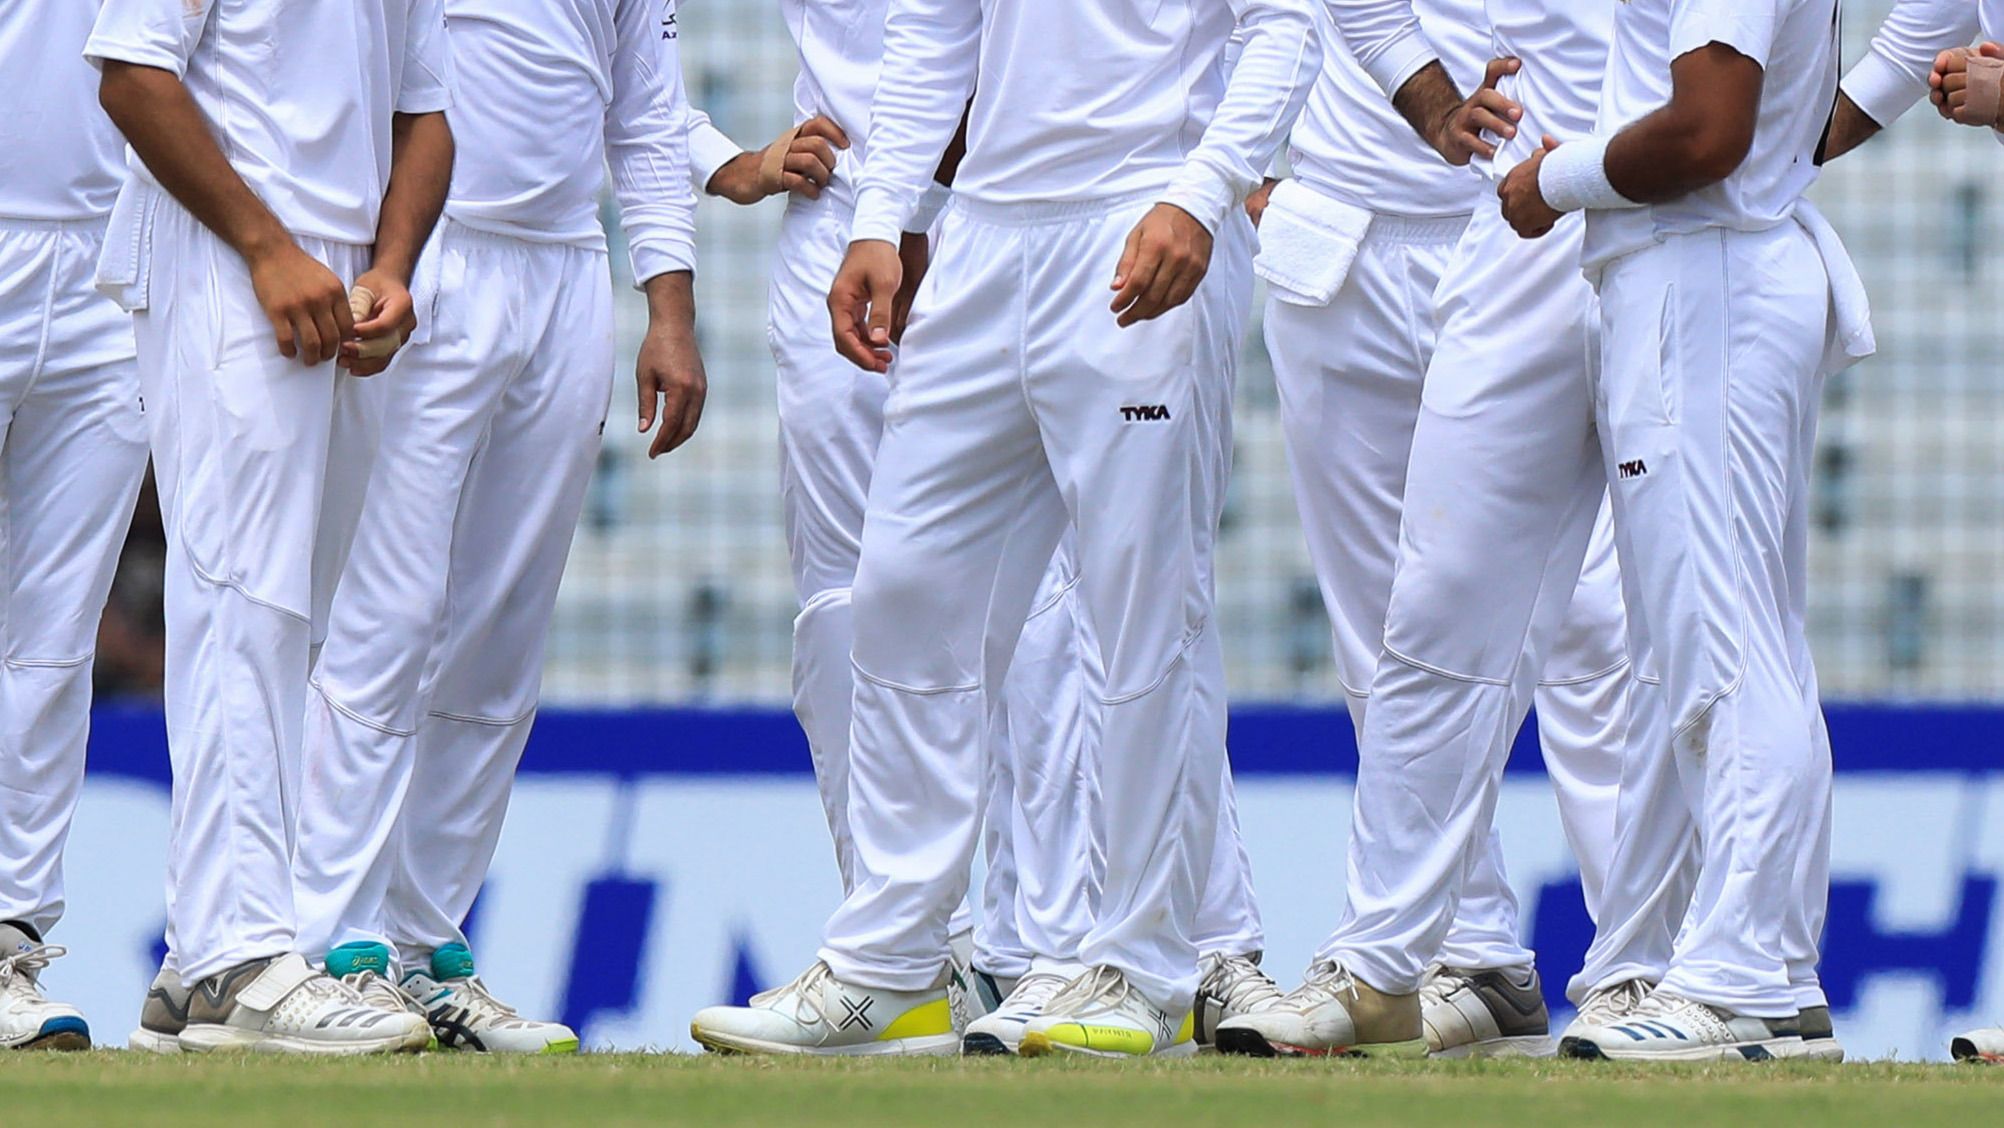 Cricket players in Test whites.